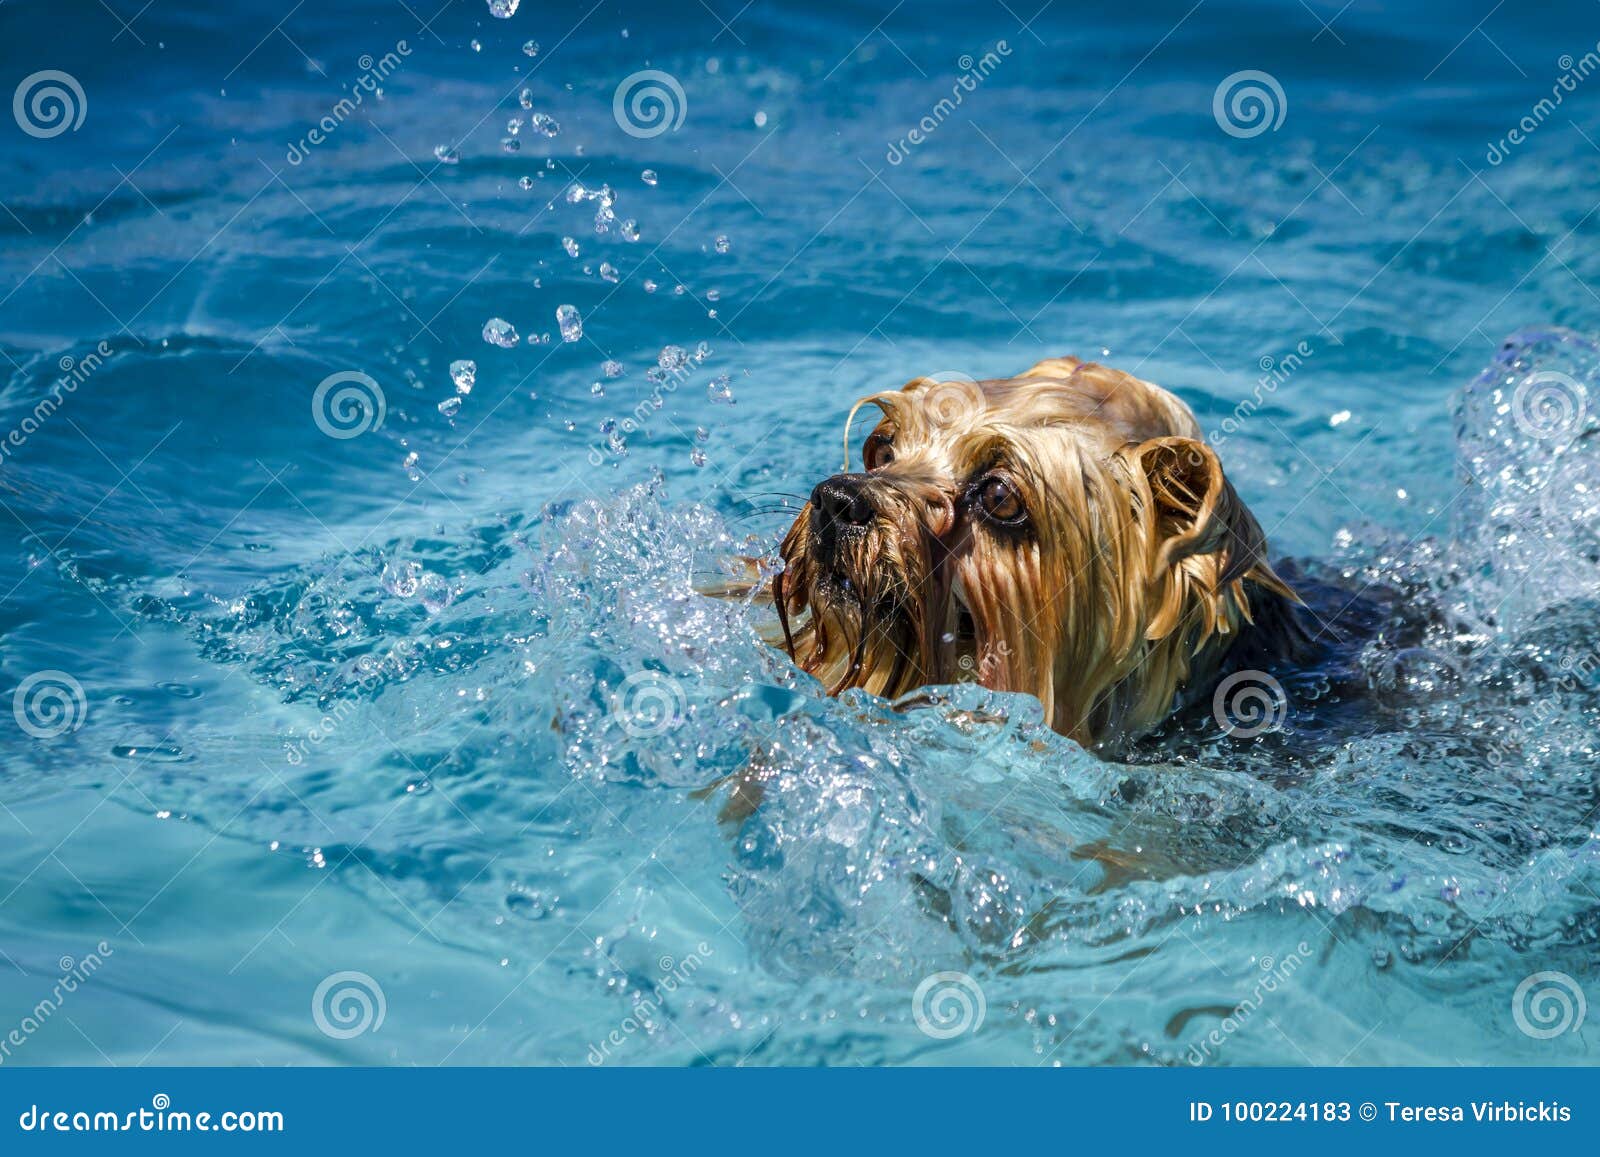 Dogs Playing in Swimming Pool Stock Image - Image of playing, public